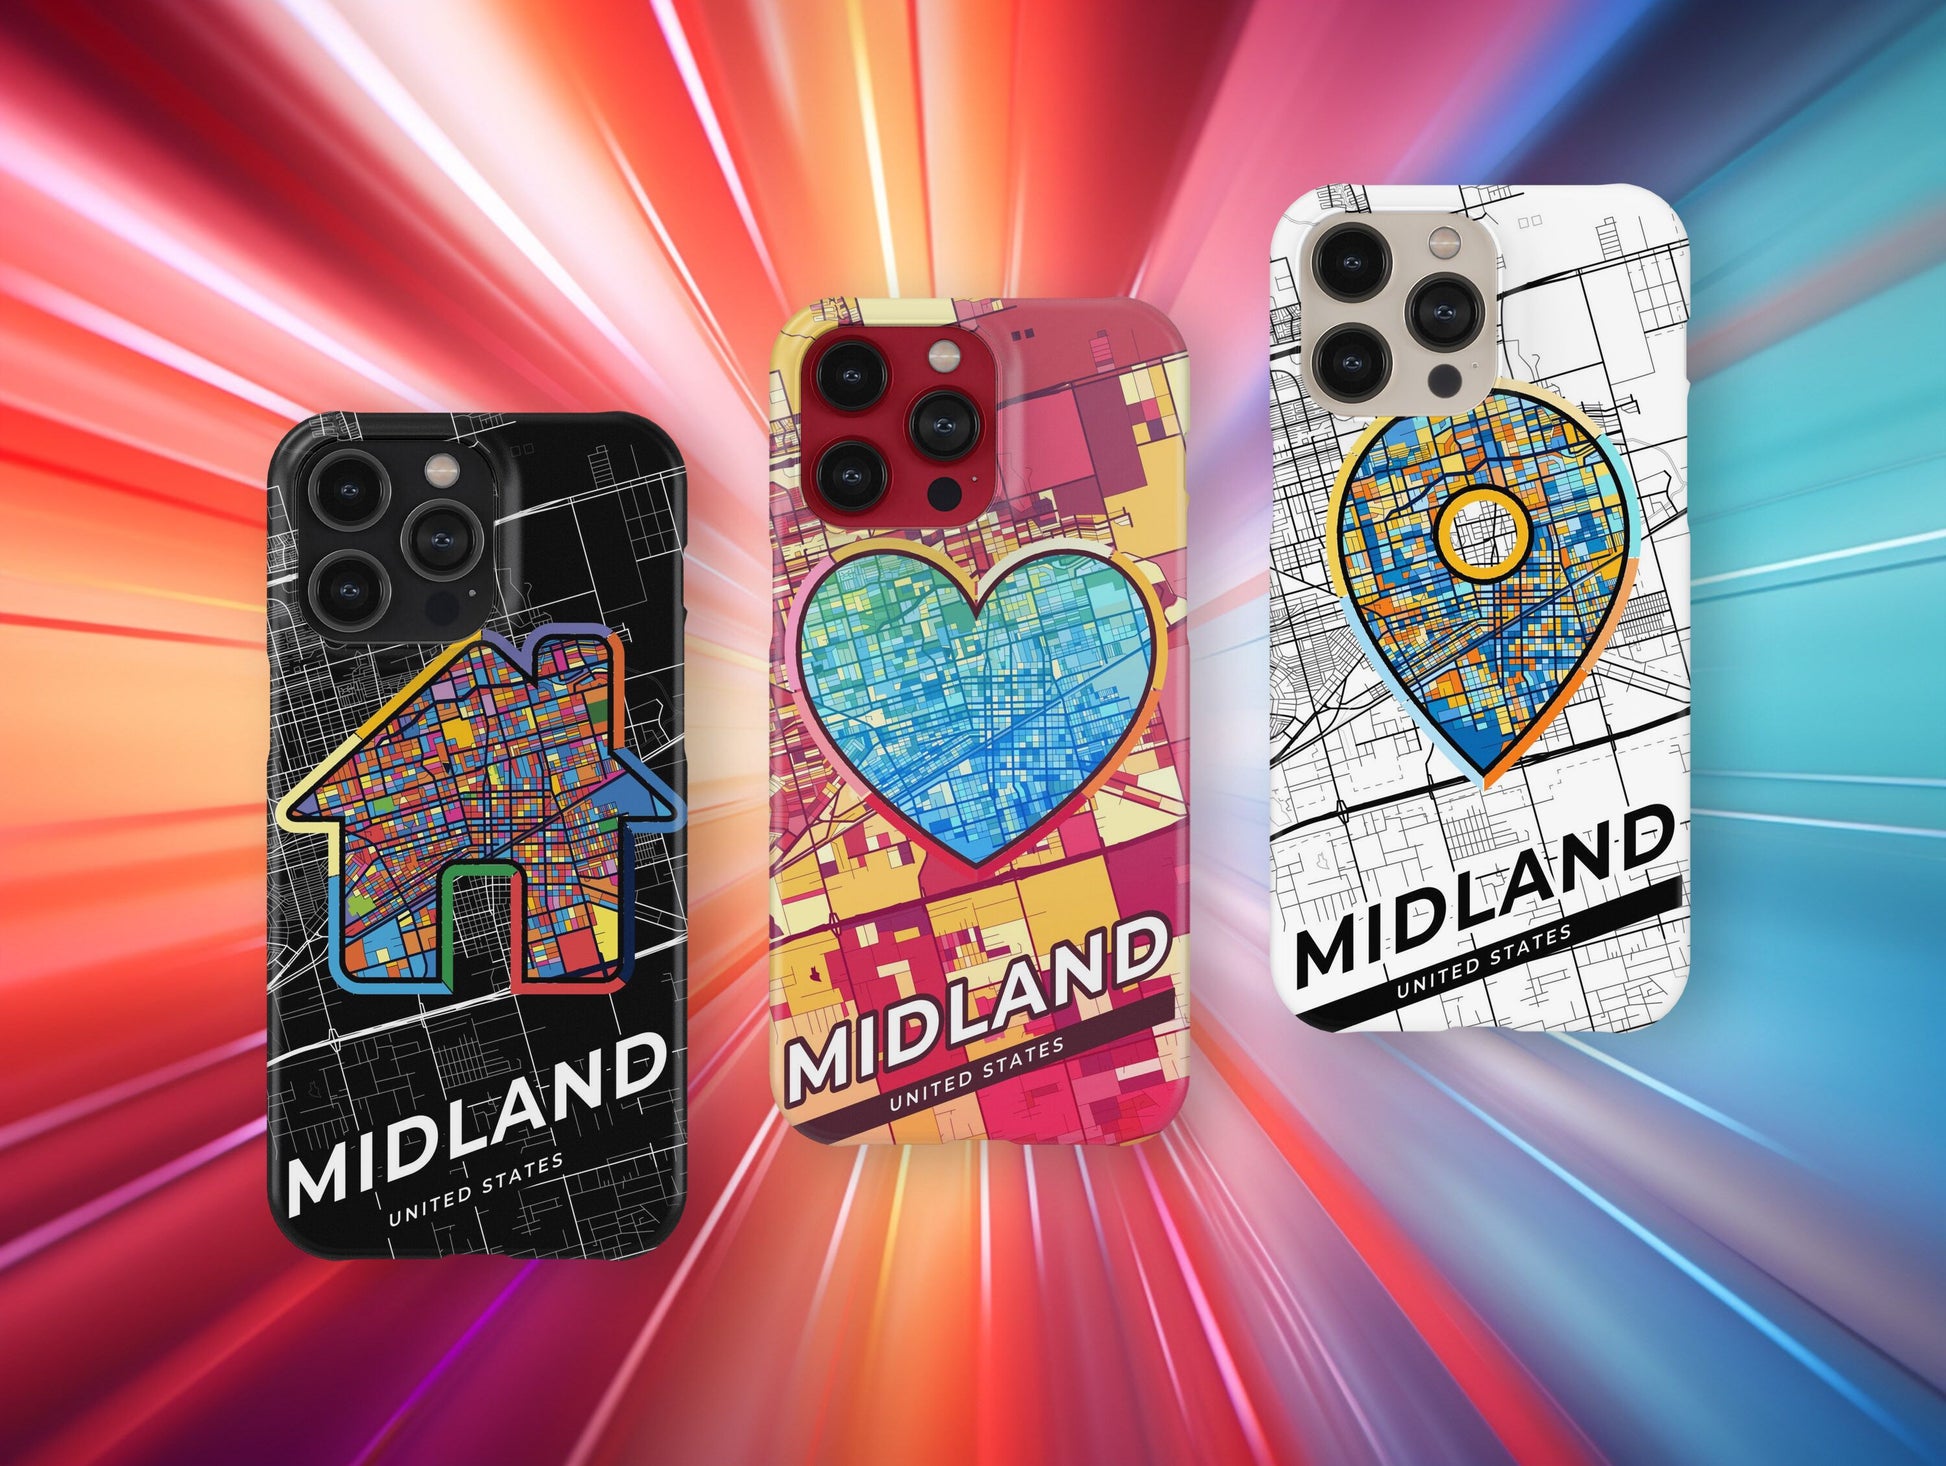 Midland Texas slim phone case with colorful icon